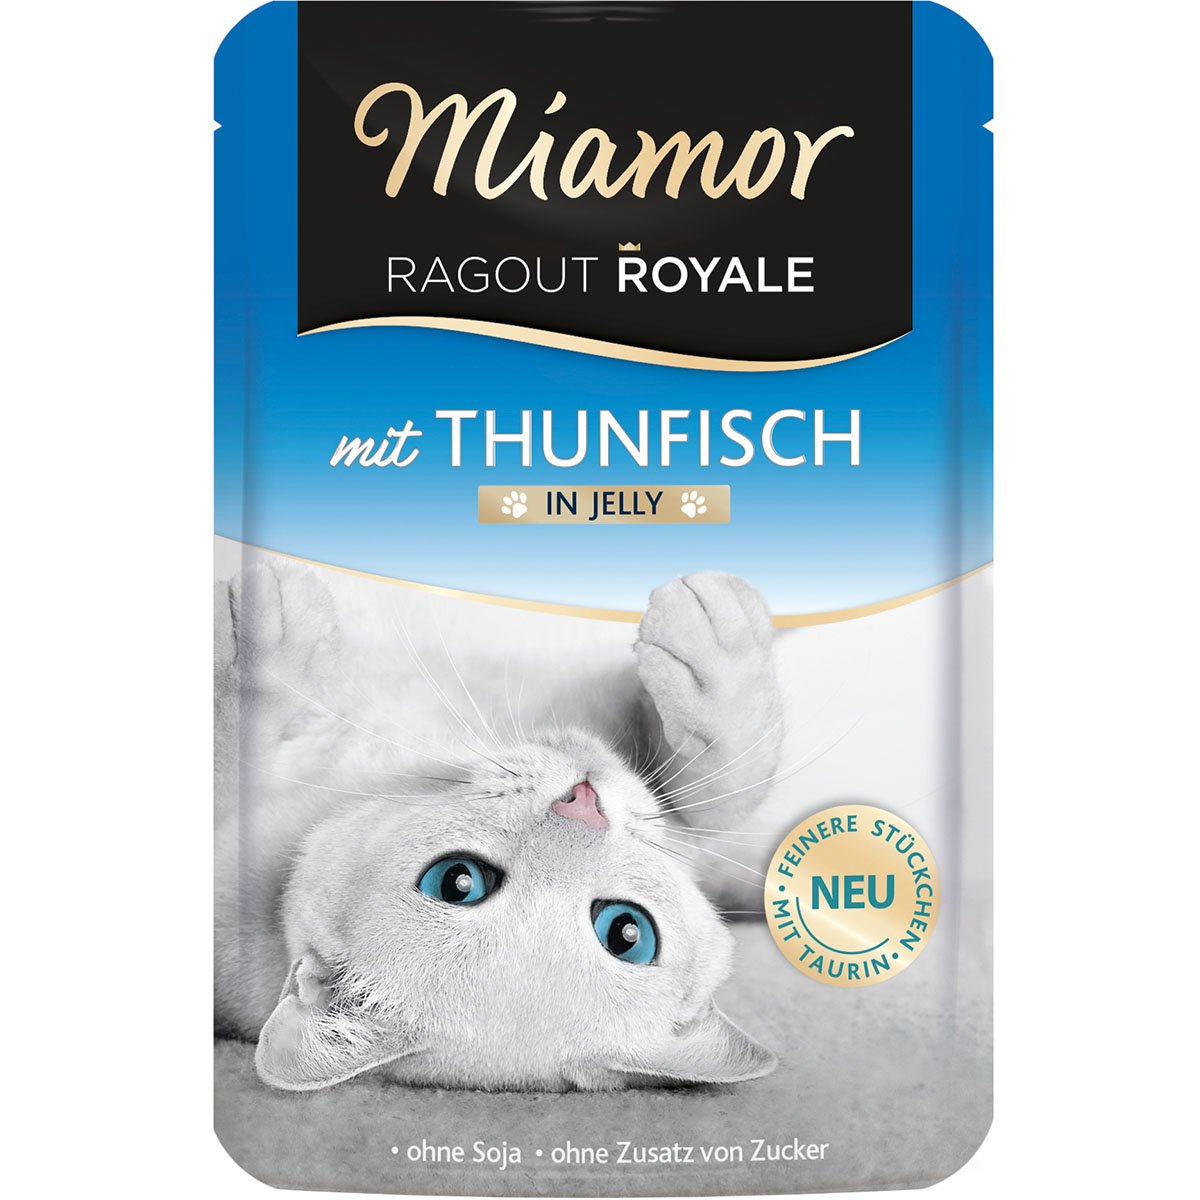 Miamor Ragout Royale Thunfisch in Jelly 22x100g